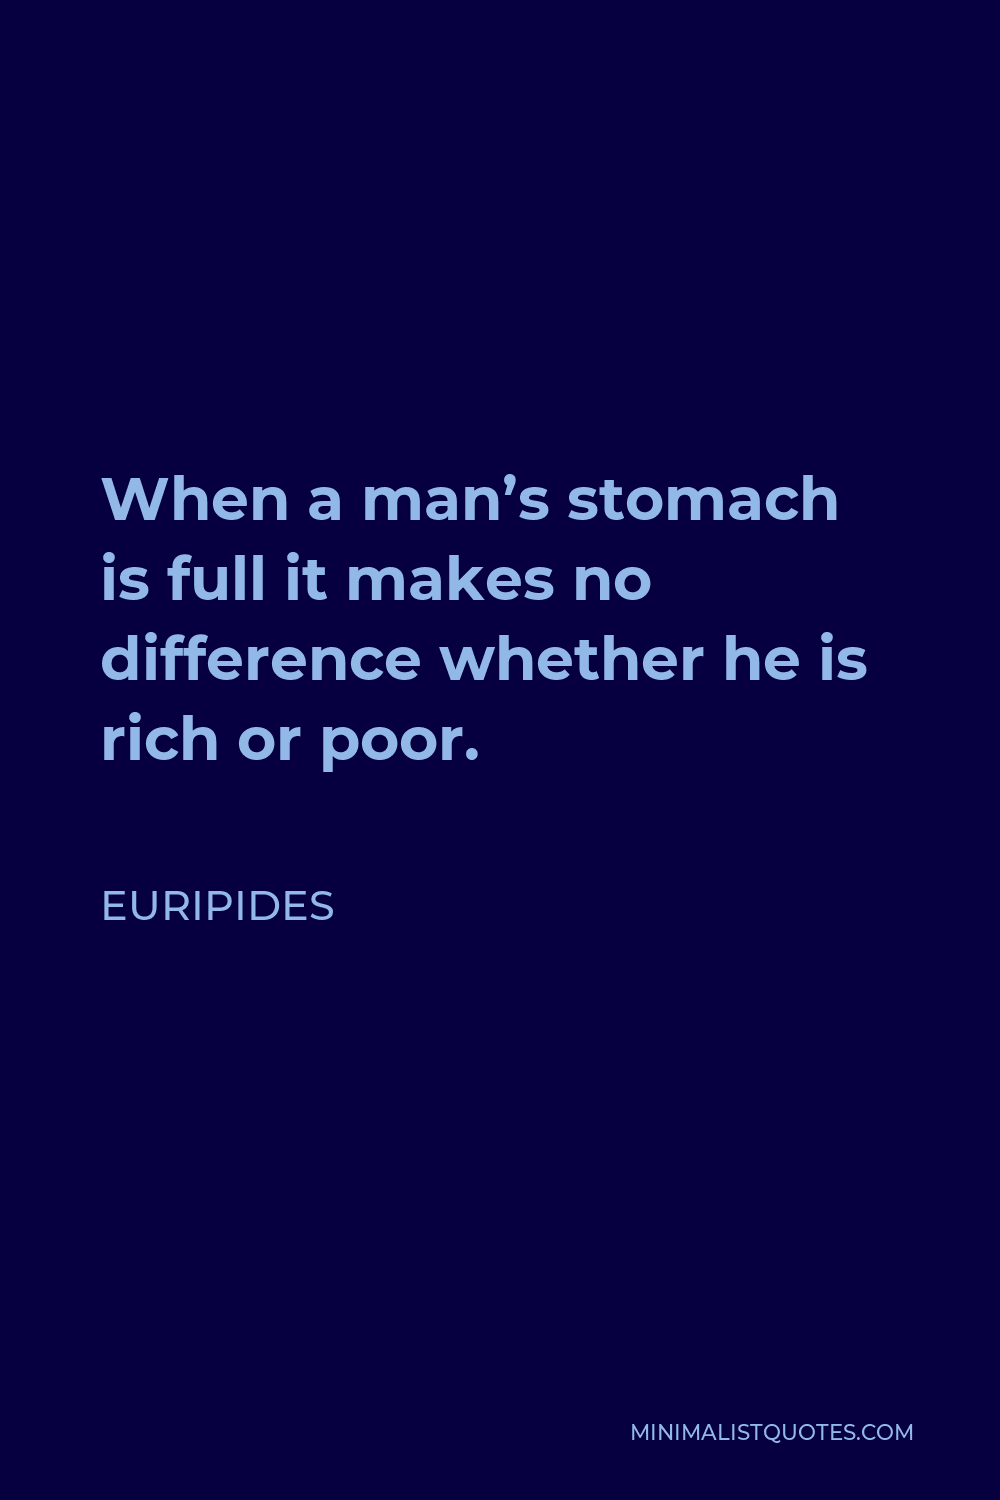 Euripides Quote: “The day is for honest men, the night for thieves.”